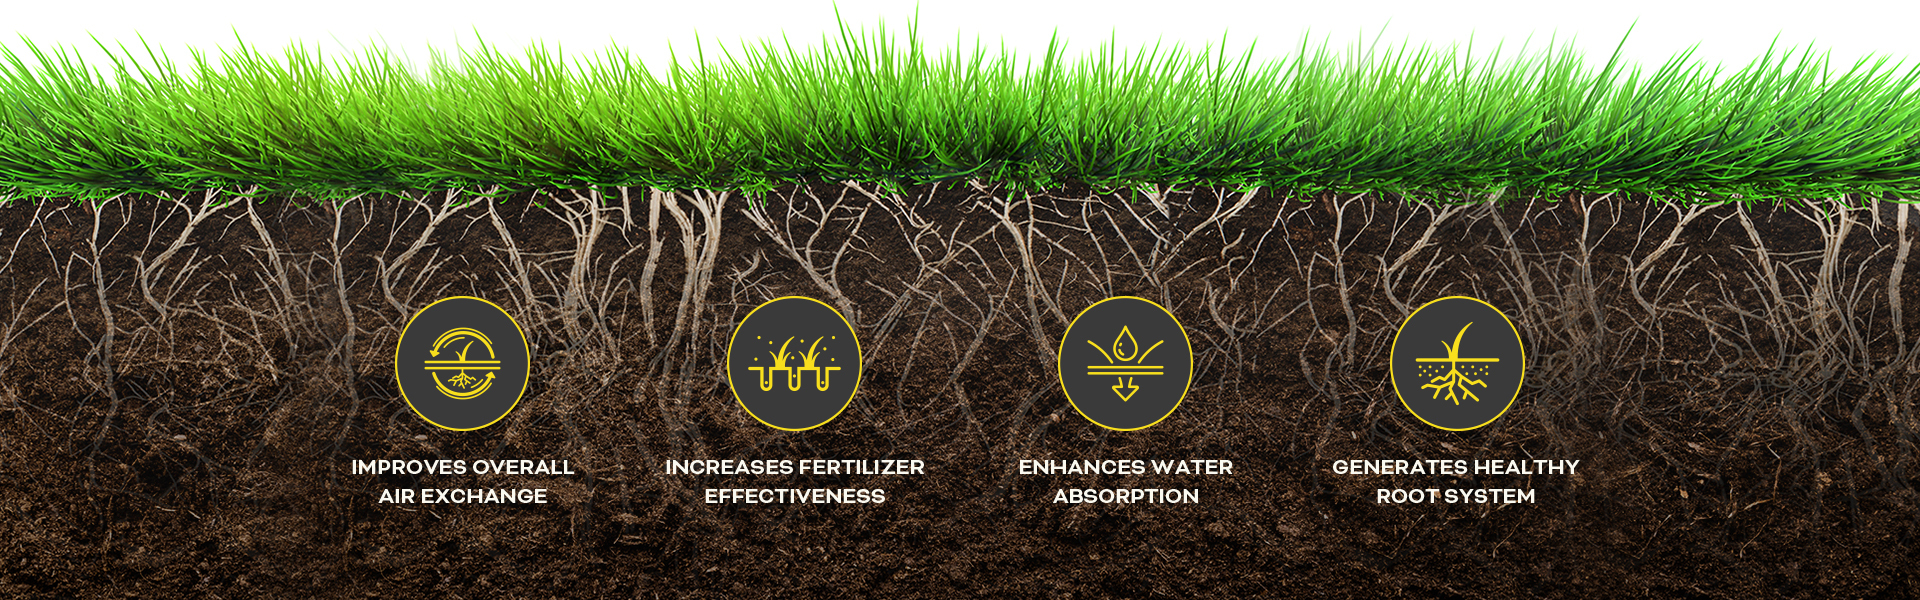 Cross-section photo of turf and soil describing the benefits of aeration